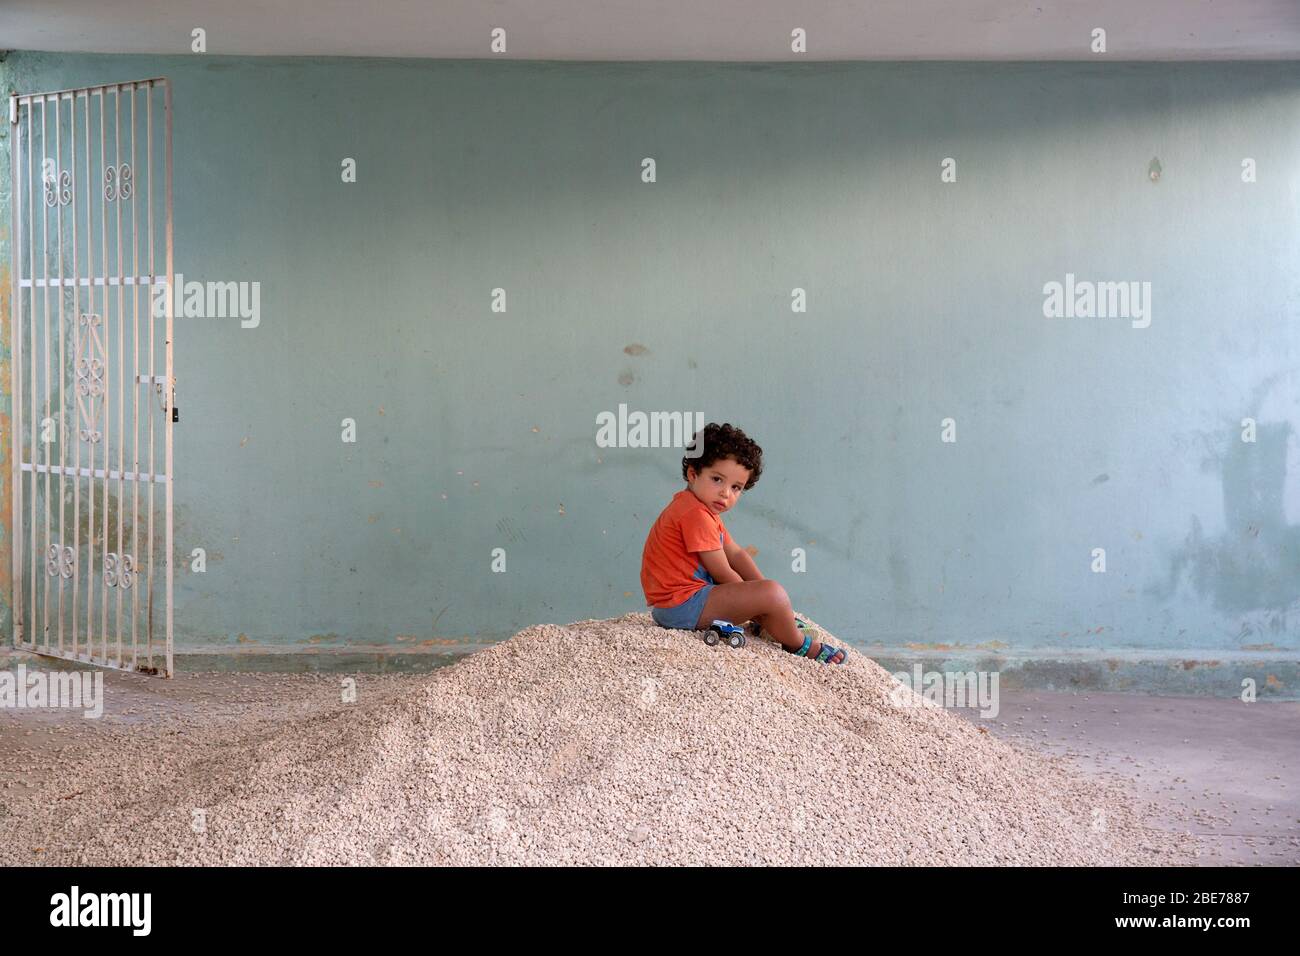 Thiago playing alone on a pile of gravel on his eighteenth day of self-isolation due to Covid-19 pandemic at a temporary home in Mérida, Yucatán, Mexico on April 1, 2020. Thiago, 3-years-old, is the son of the photographer. He was documented as part of a project titled “When I grow up” about a child growing up on quarantine, away from other children and from the outside world, during the coronavirus pandemic. Photo by Bénédicte Desrus Stock Photo